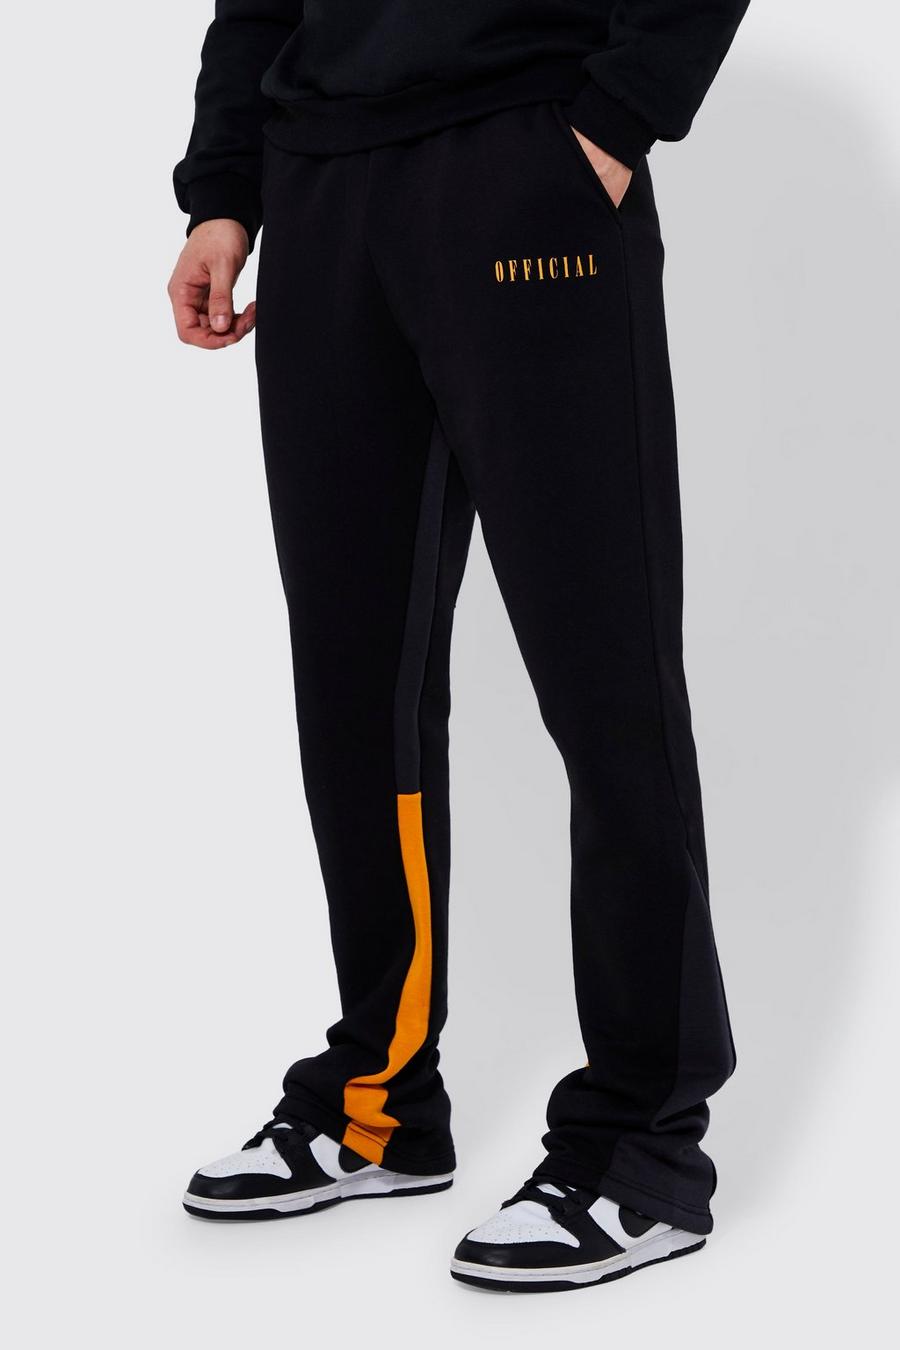 Black Tall Slim Official Contrast Gusset Jogger